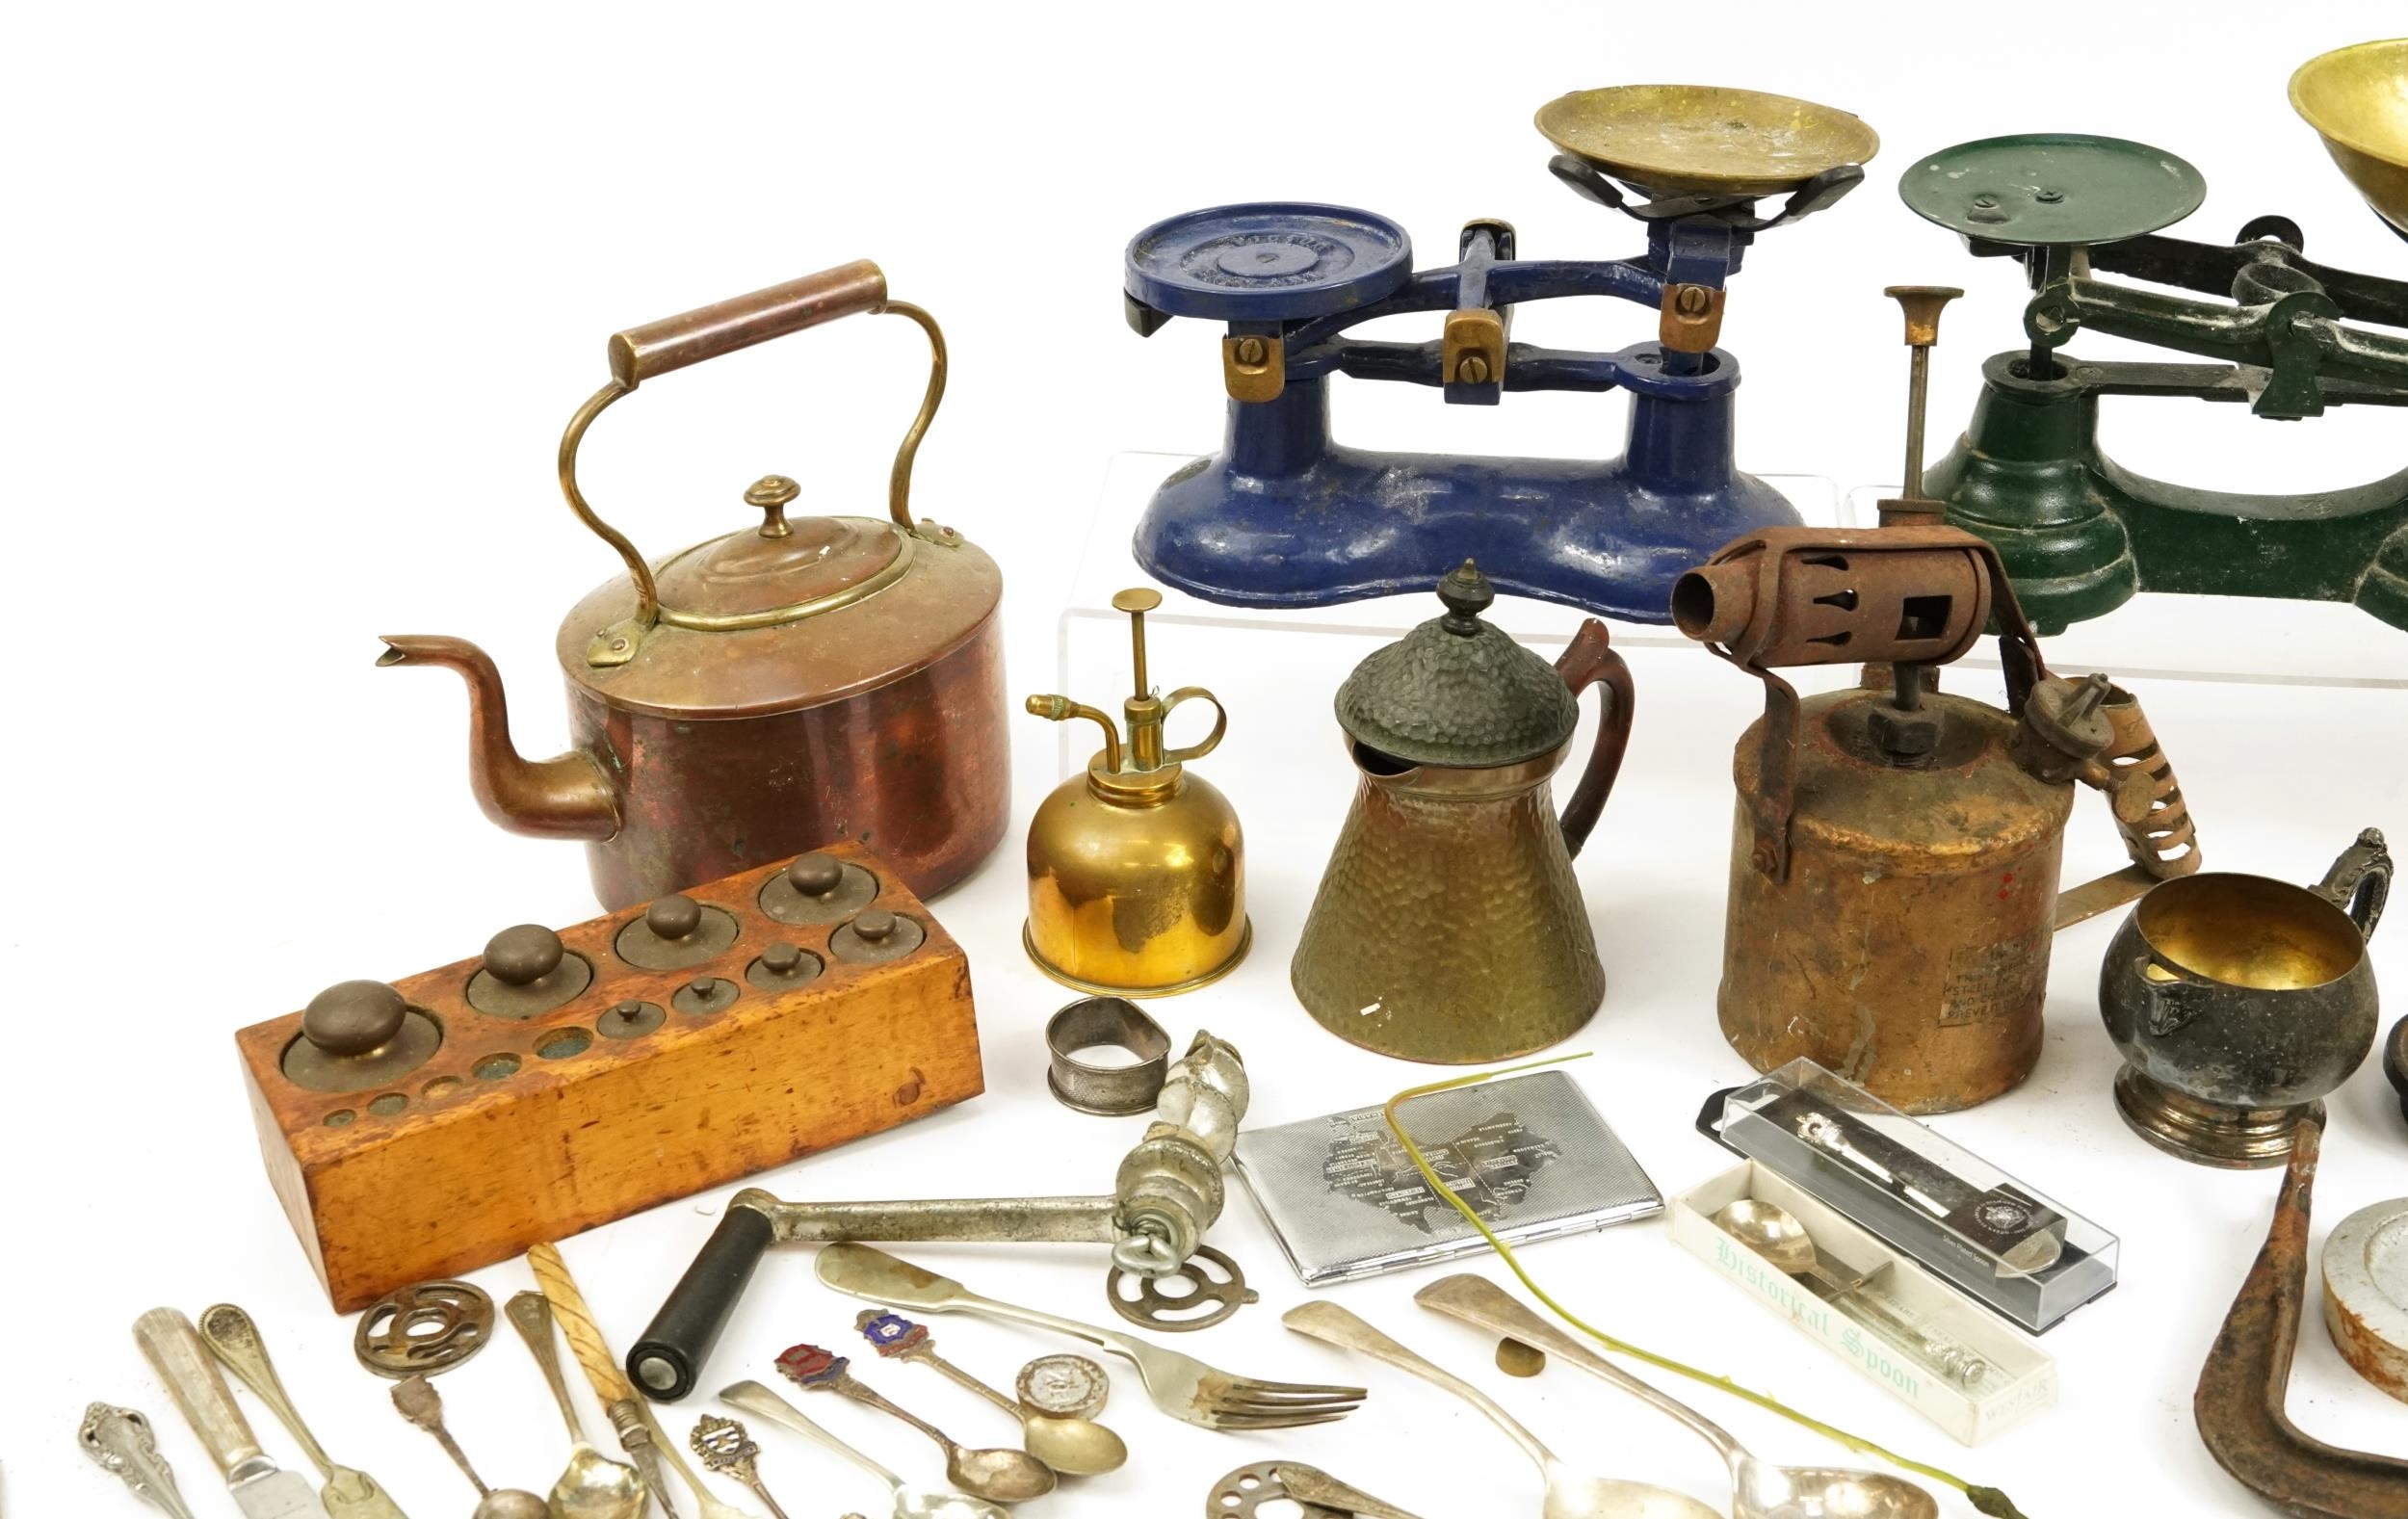 19th century and later metalware including scales, Porkert mincer and silver plated cutlery - Image 2 of 5